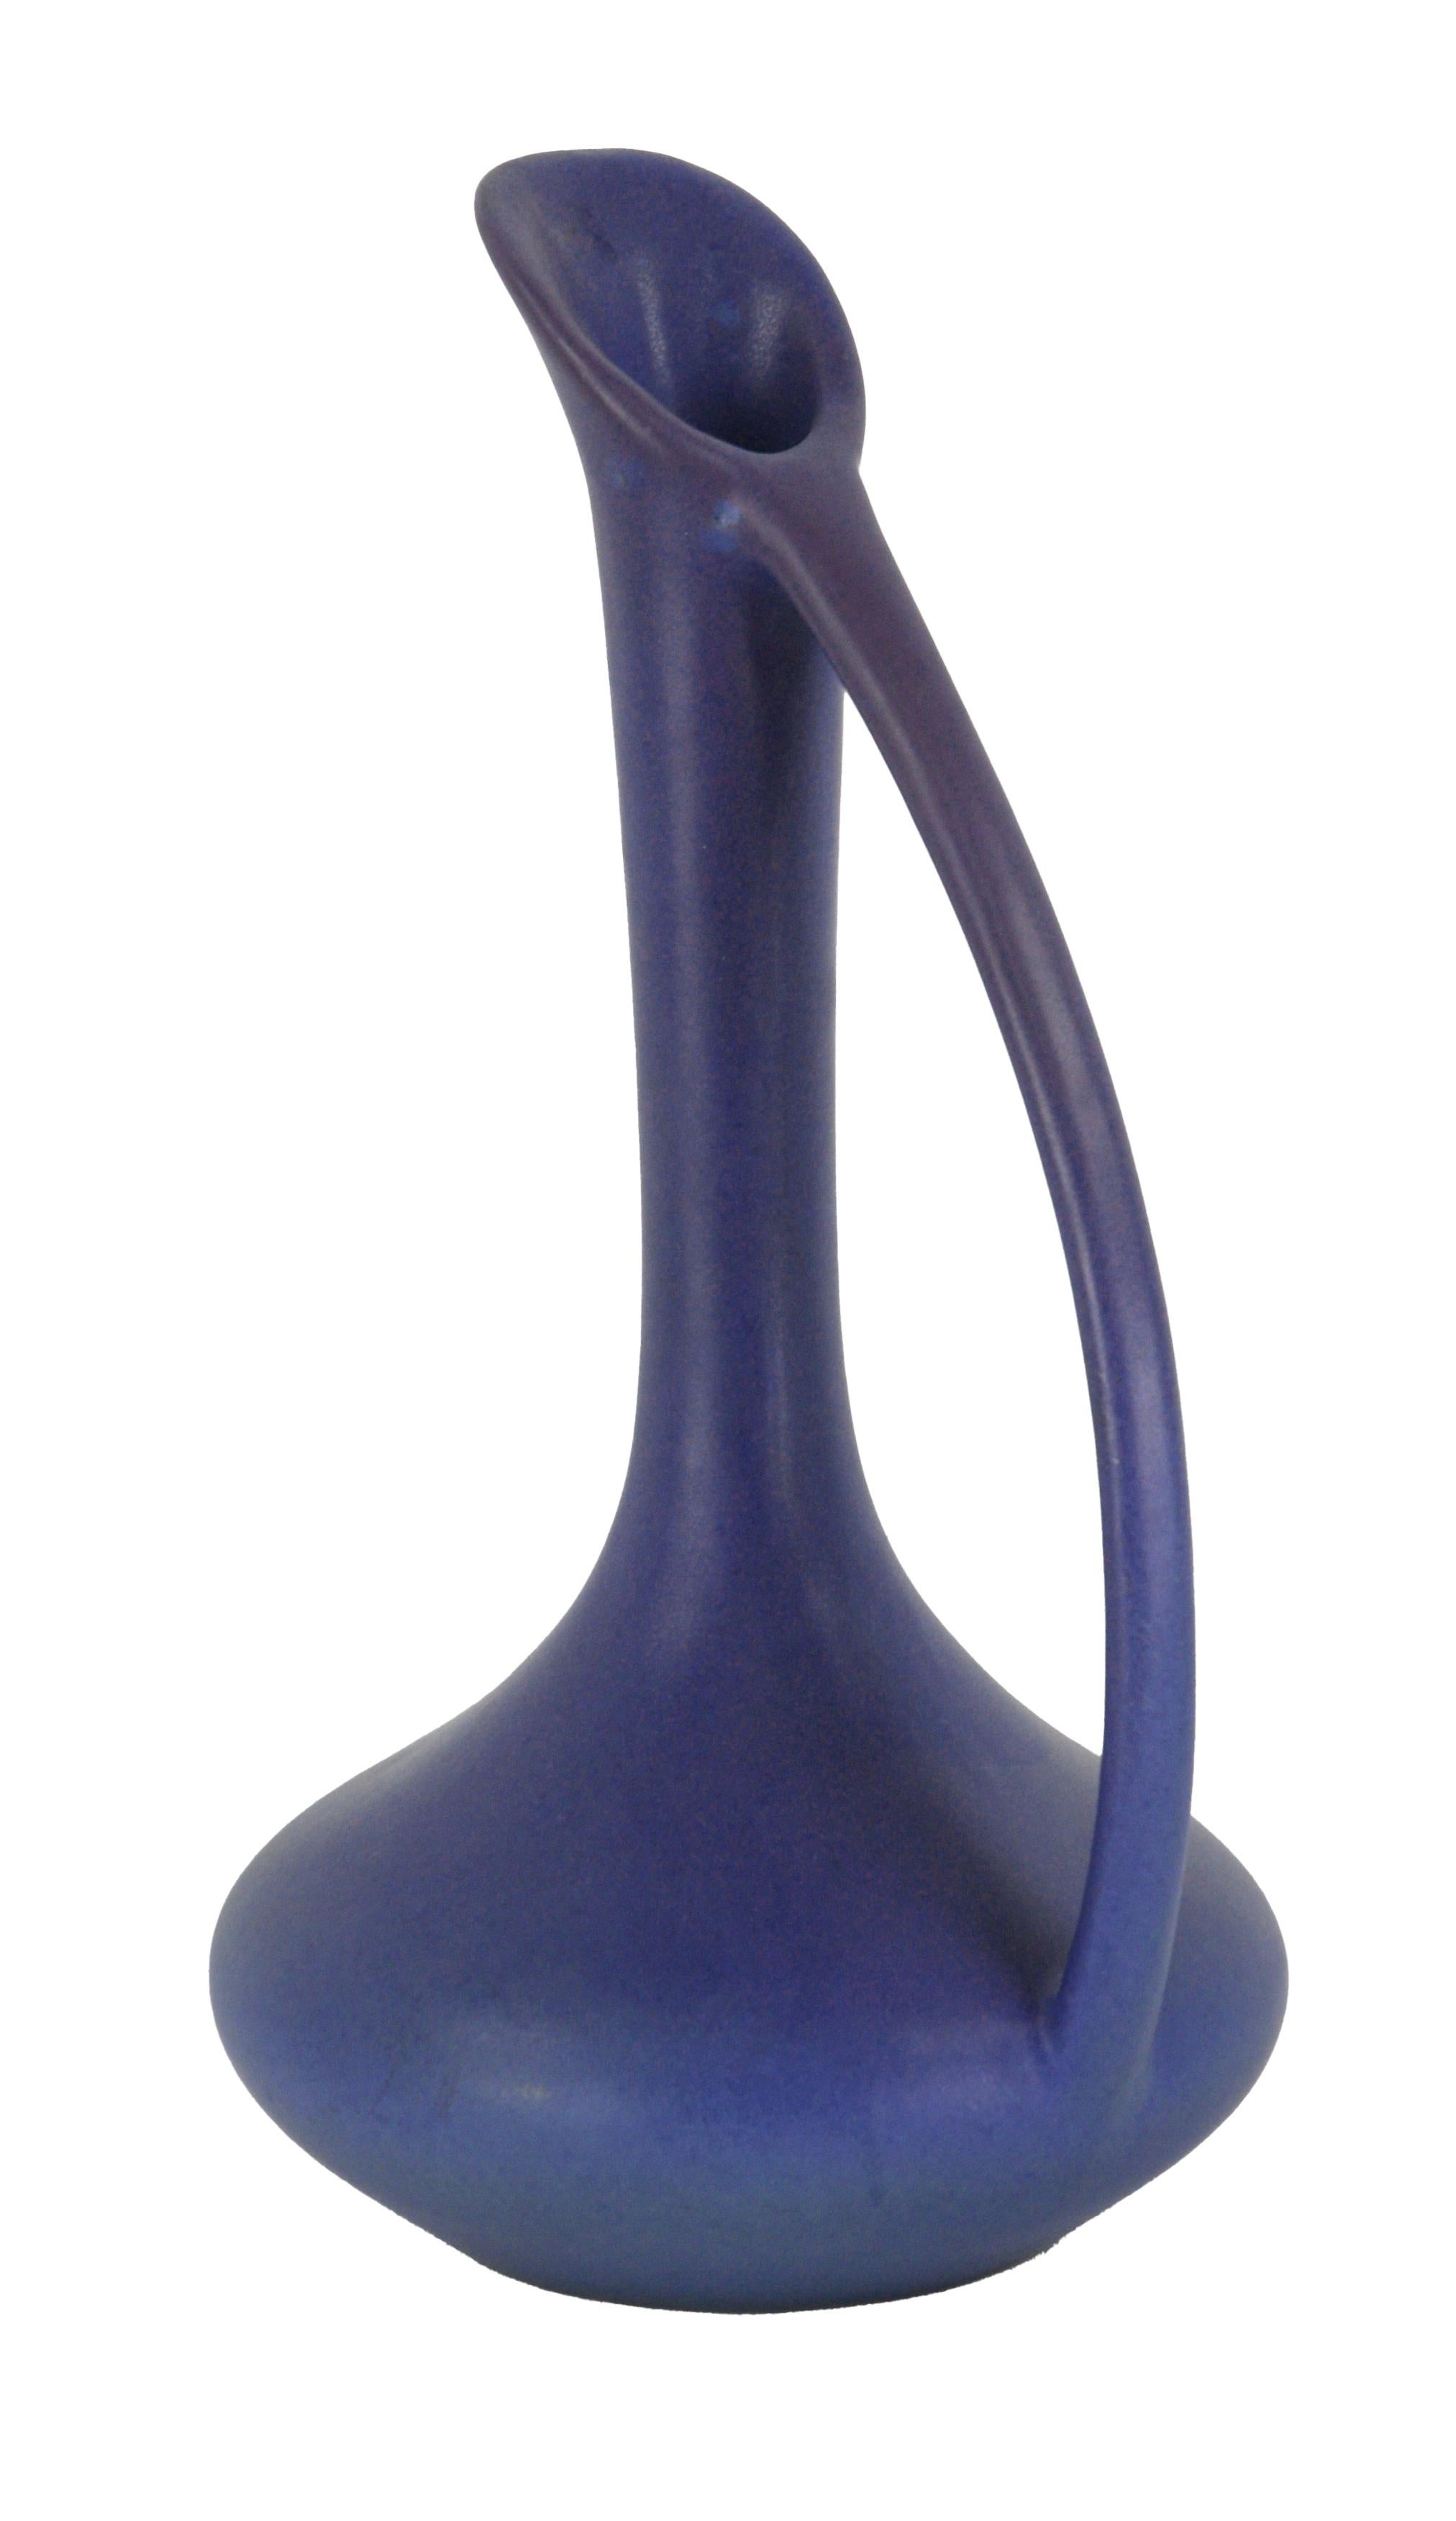 Elegant blue-purple water pitcher by Van Briggle Pottery. This color is uncommon - most of these pieces were made in a turquoise color. Finished by Carolyn French. Glazed by either Annette Moody or Garoid (Gary) Dhondt.

Maker's logo, name, and